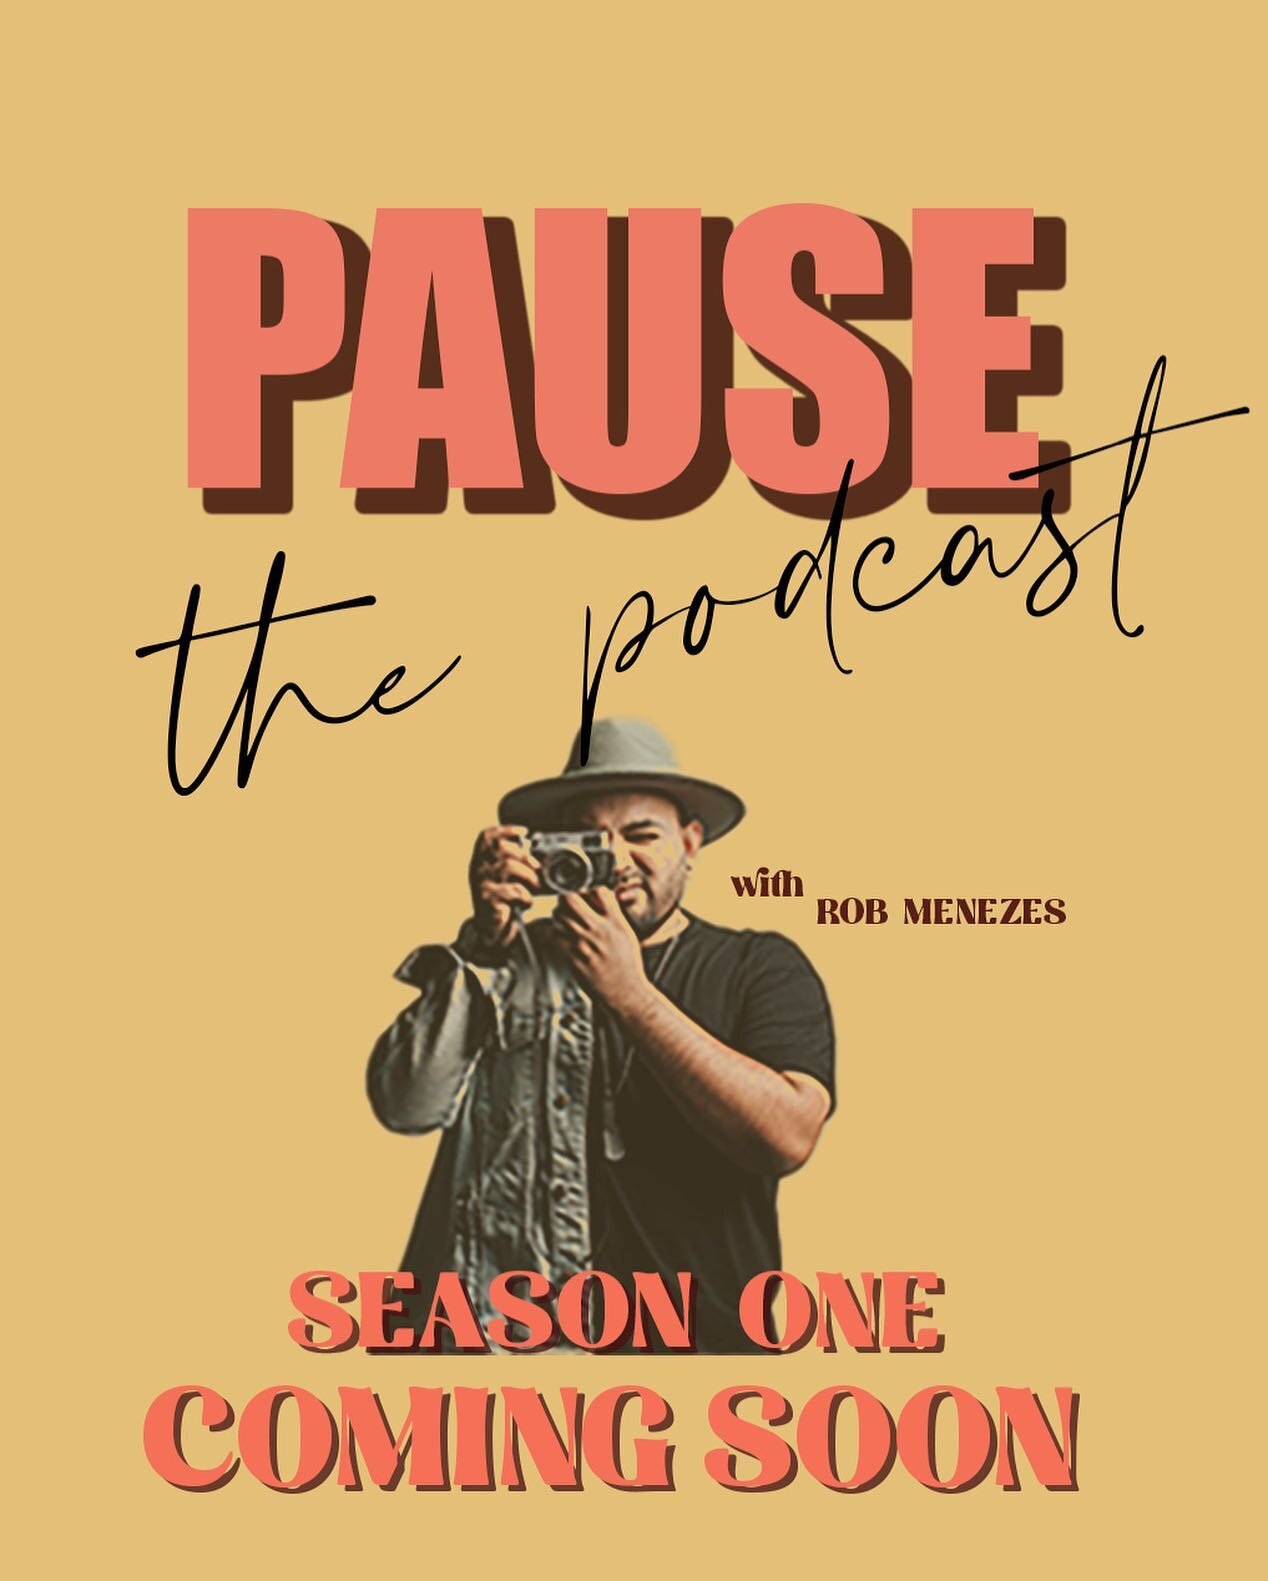 Two years in the making! 
Excited to finally share the season one with you all very soon 🙌

#podcastshow #podcasthost #podcastseries